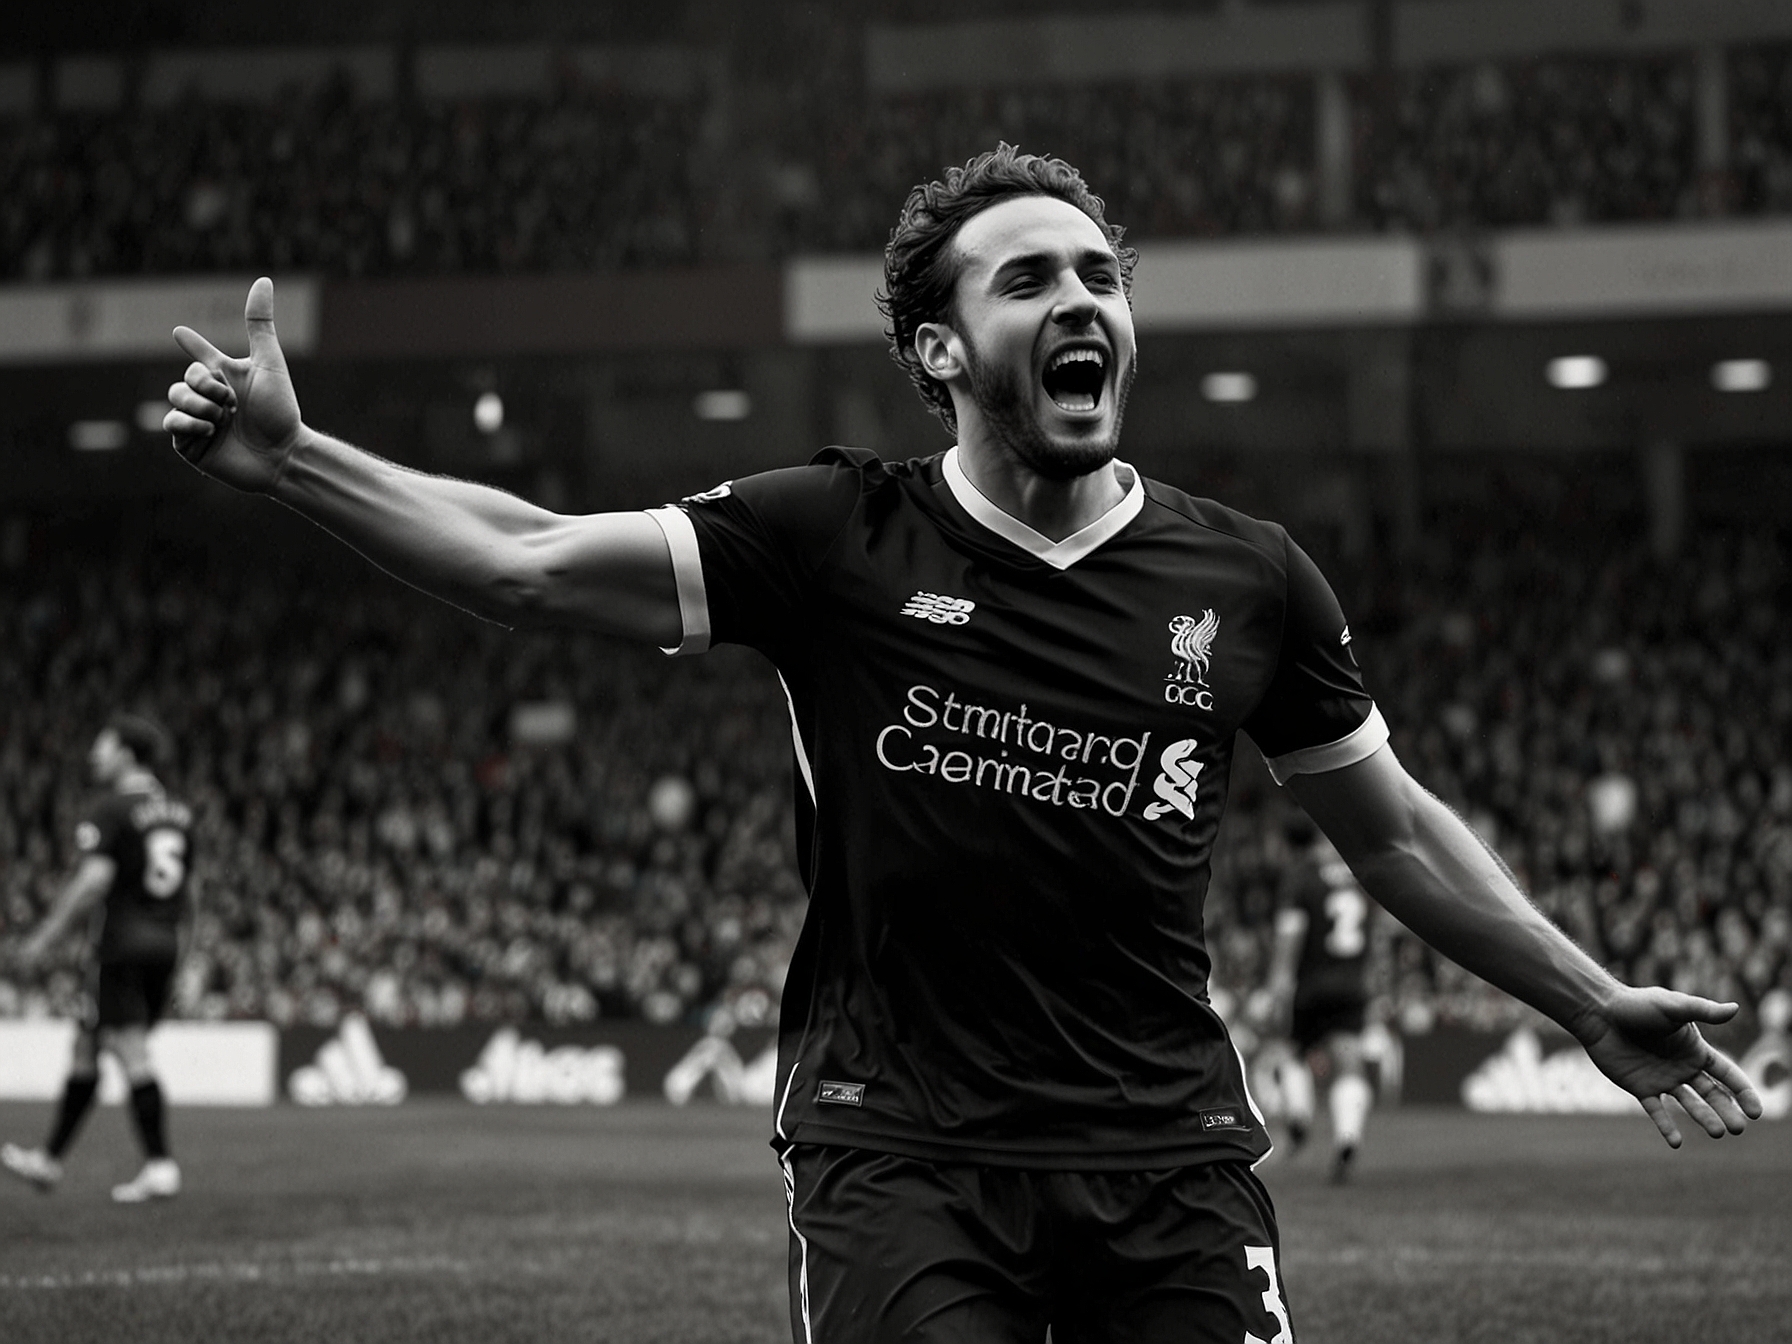 Jota celebrating a goal during his debut season at Liverpool, illustrating his potential impact when fit and his crucial role in the team's attacking force.